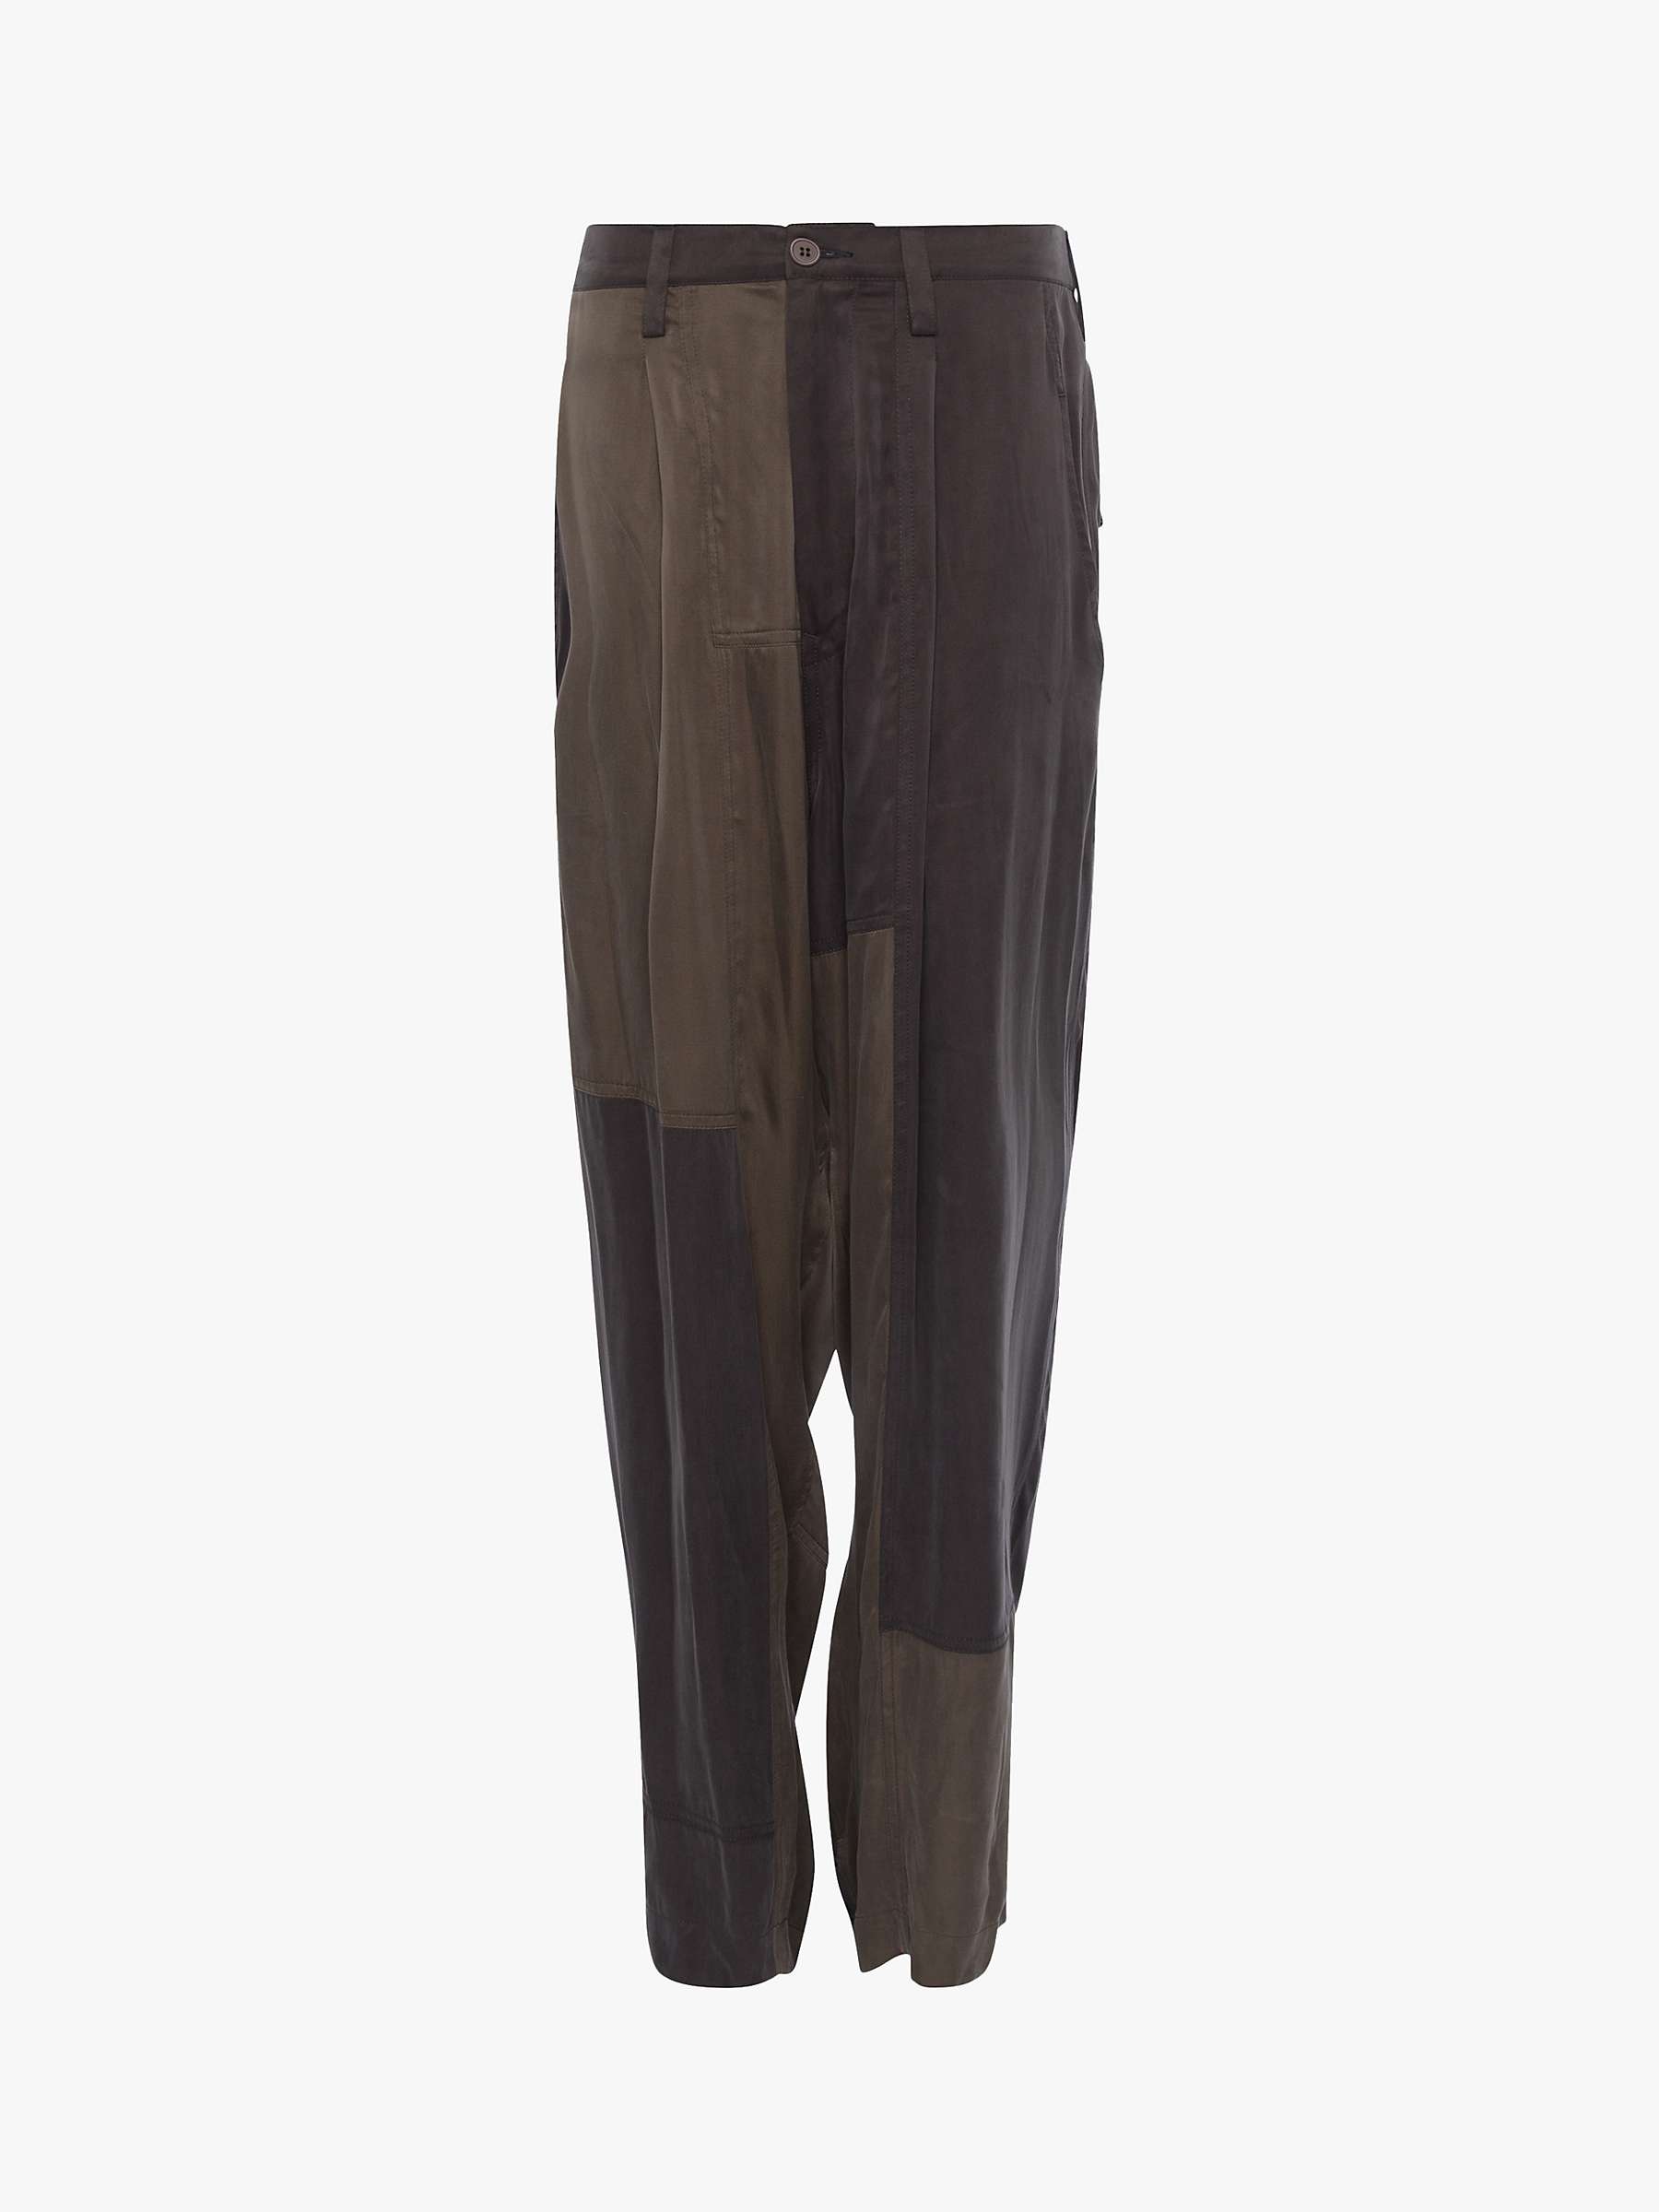 Buy French Connection Altra Colour Block Drape Trousers, Deep Moss/After Dark Online at johnlewis.com